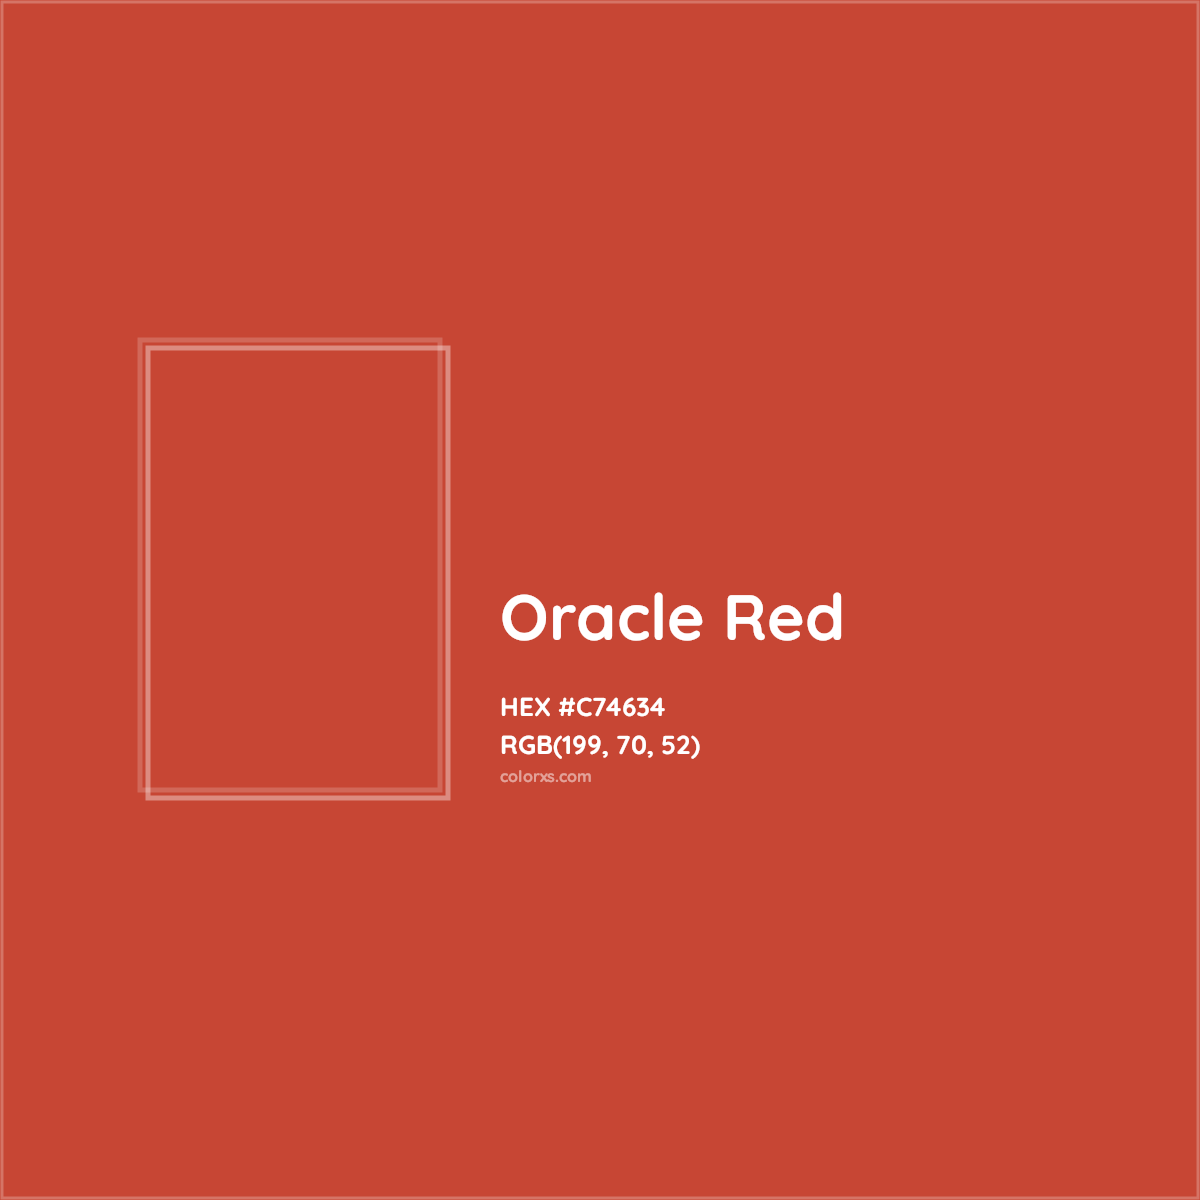 HEX #C74634 Oracle Red Other Brand - Color Code